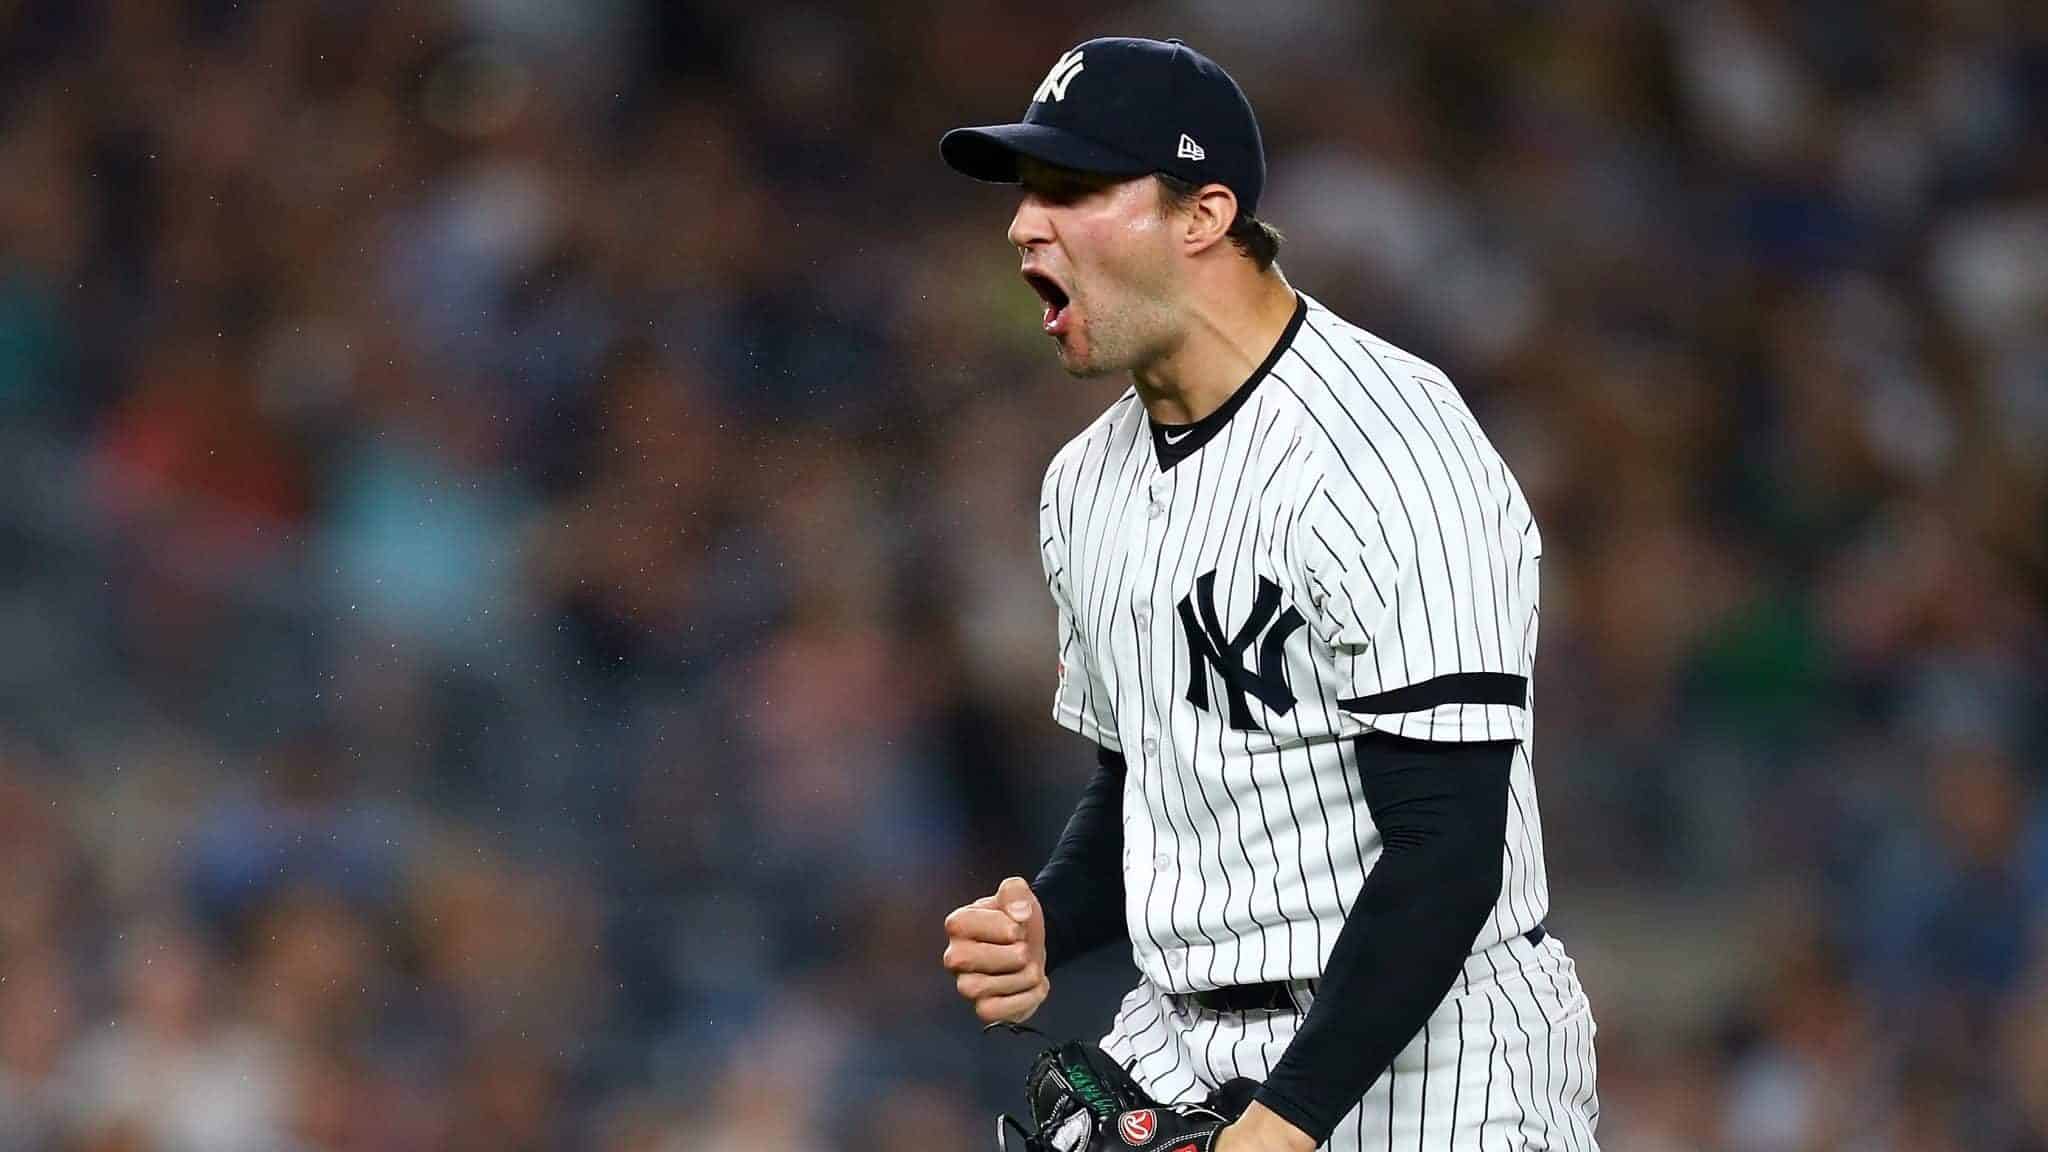 NEW YORK, NEW YORK - AUGUST 16: Tommy Kahnle #48 of the New York Yankees reacts after striking out Franmil Reyes #32 of the Cleveland Indians to end the top of the seventh inning at Yankee Stadium on August 16, 2019 in New York City.